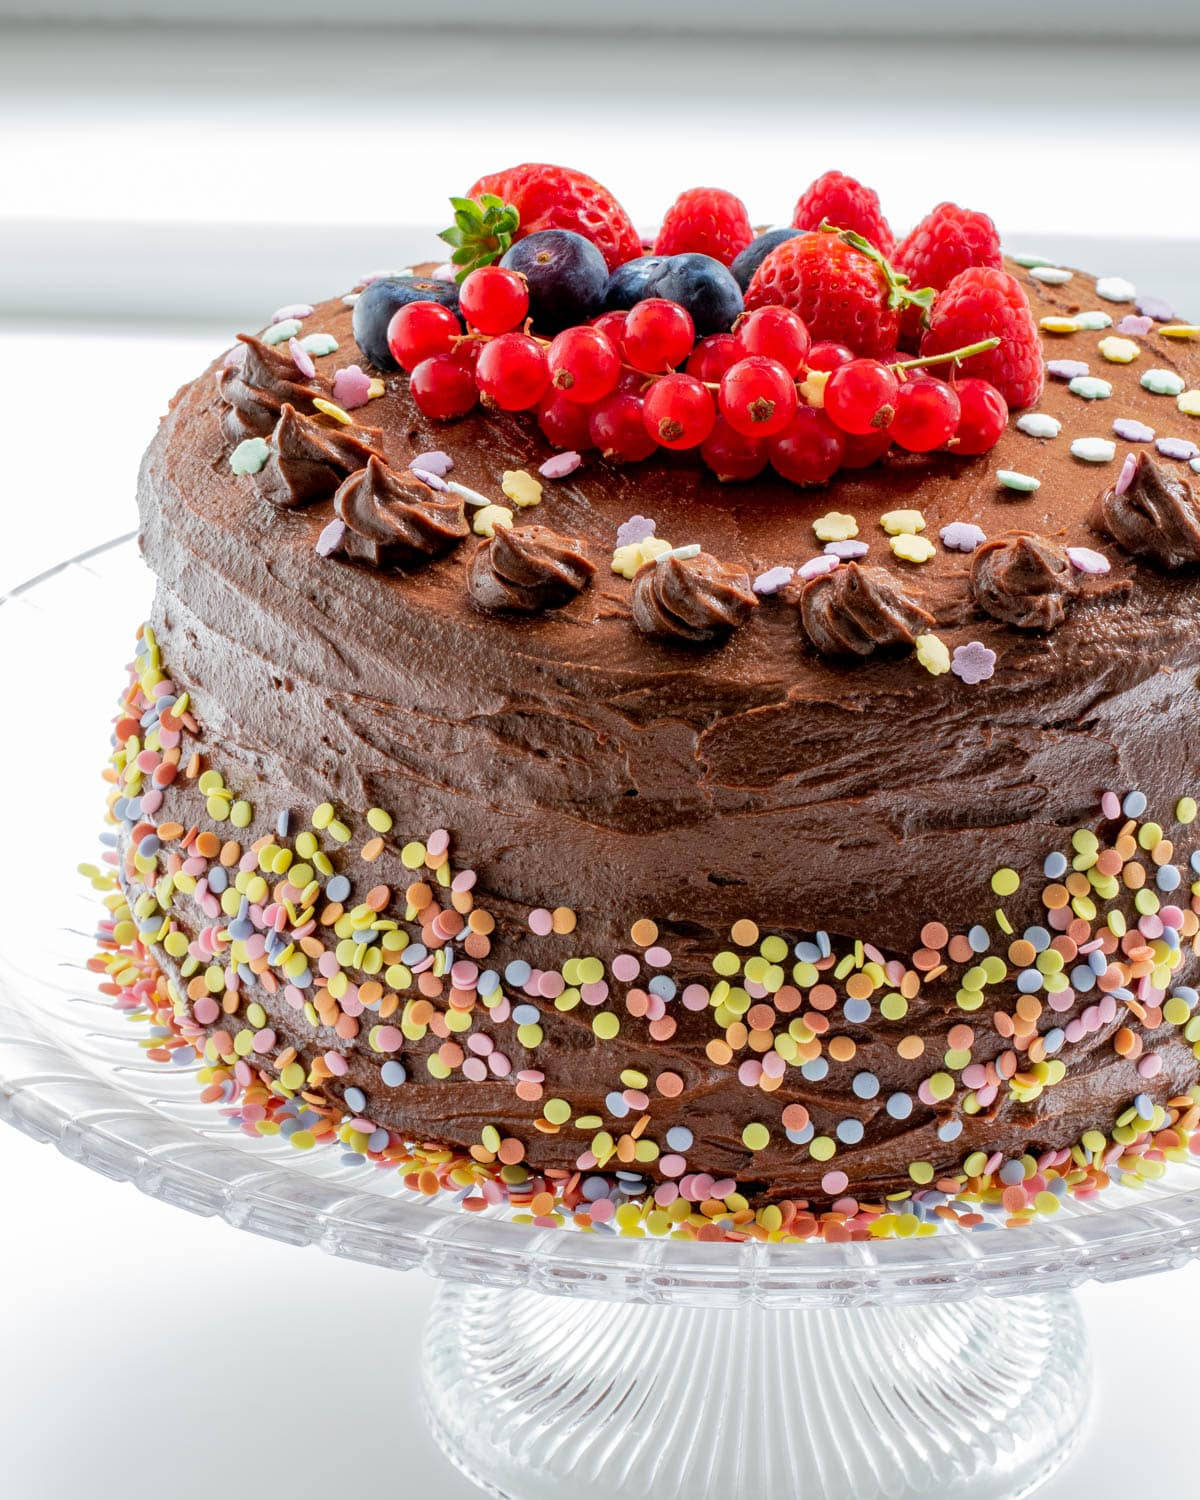 Chocolate Cake Decorated With Berries Wallpaper